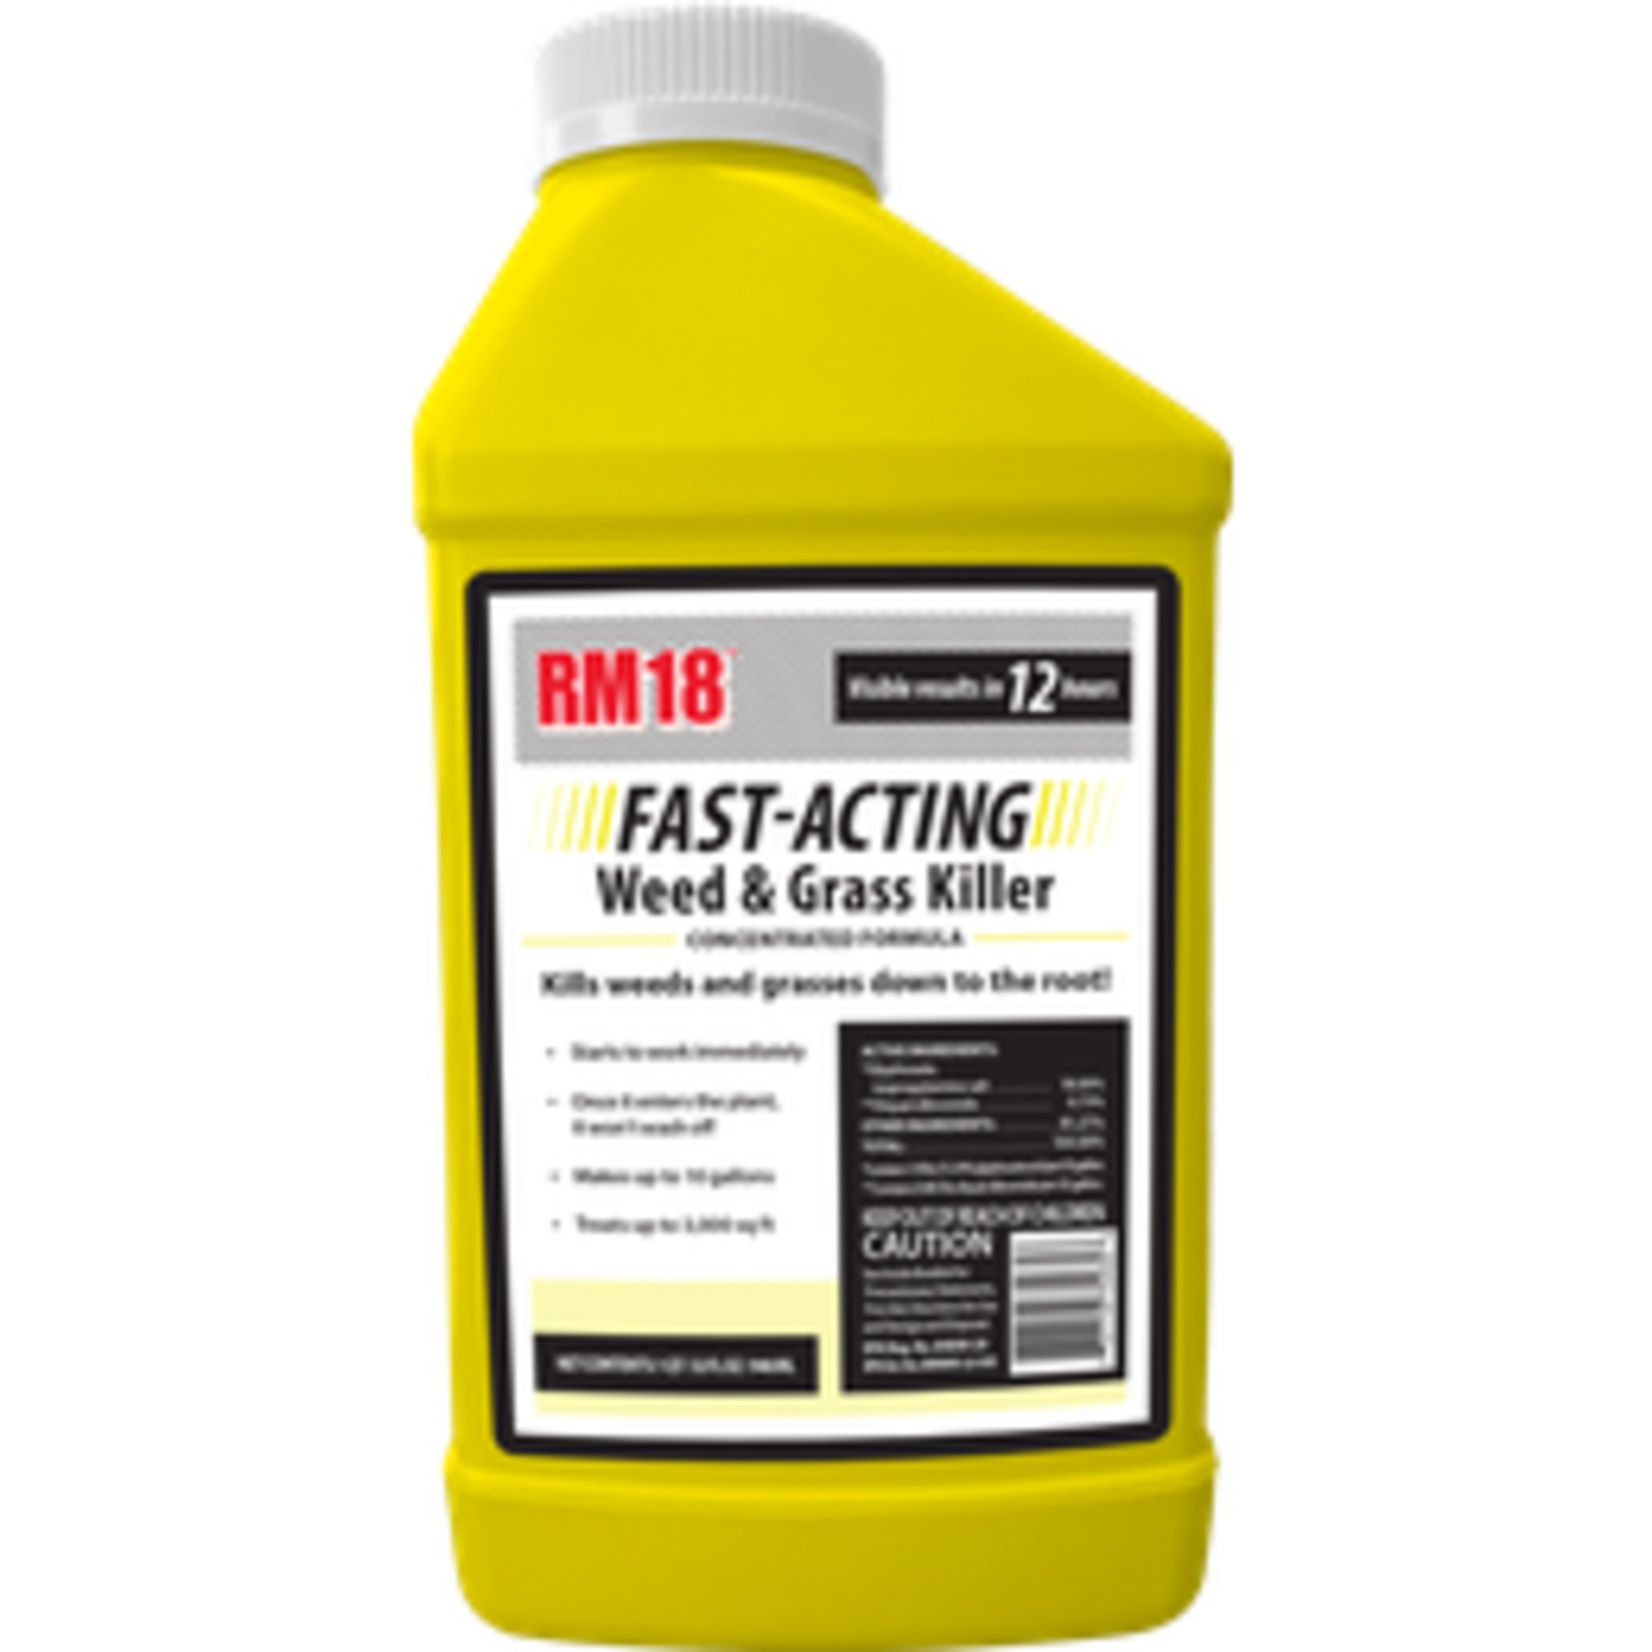 RM18 FAST ACTING WEED & GRASS KILLER QT